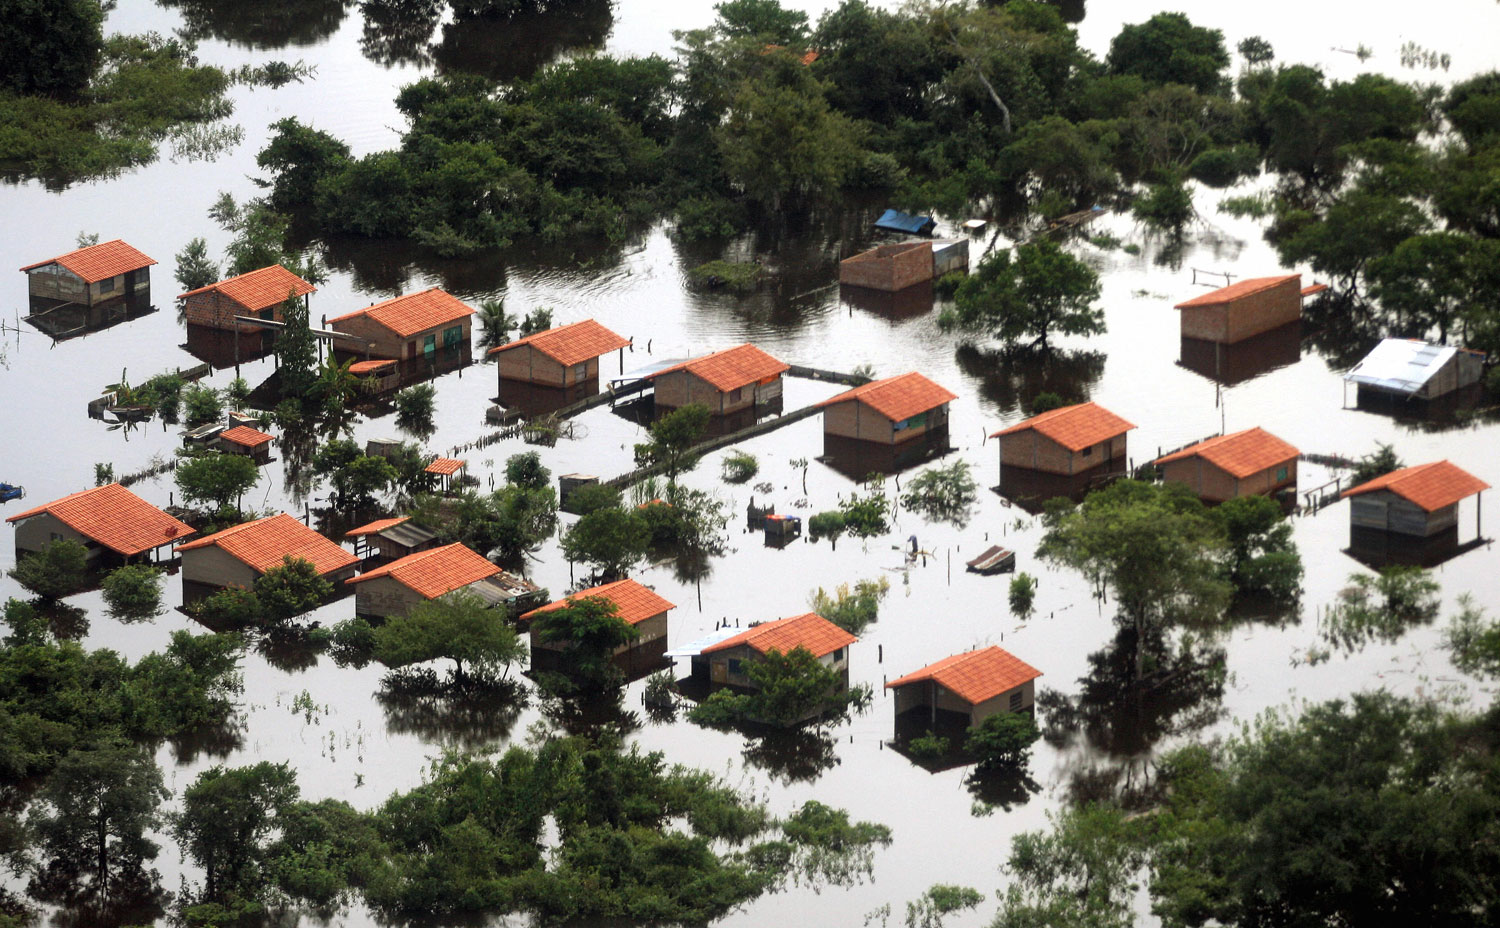 Aerial view of a flooded area in Trinidad, Beni, Bolivia on Feb. 24, 2007. Authorities say two months of rain and floods left 35 people dead, 10 unaccounted for, and affected hundreds of thousands of people. The disaster, blamed on the "El Nino" weather phenomenon, also has caused millions of dollars in material losses. (Aizar Ralder—AFP/Getty Images)